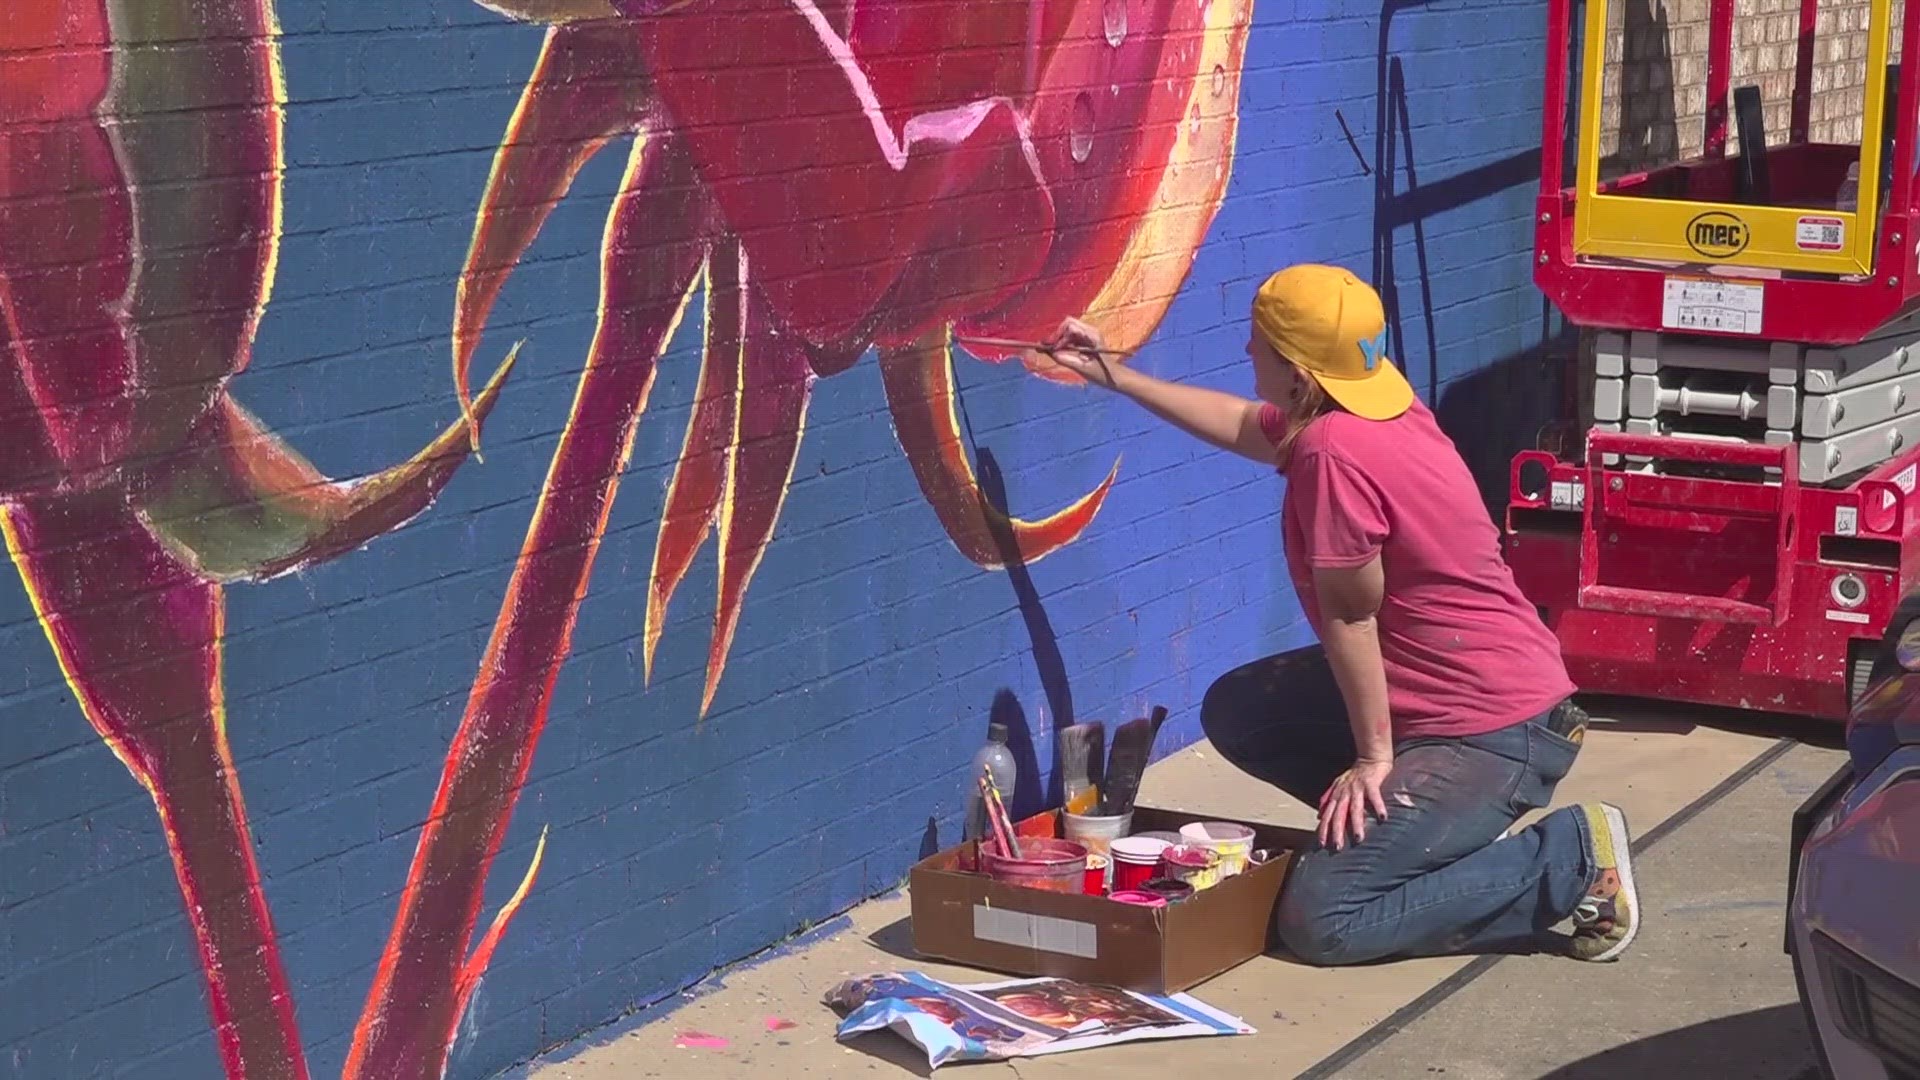 The first-ever mural festival brought artists near and far together, and can make a perfect backdrop for a social media post.